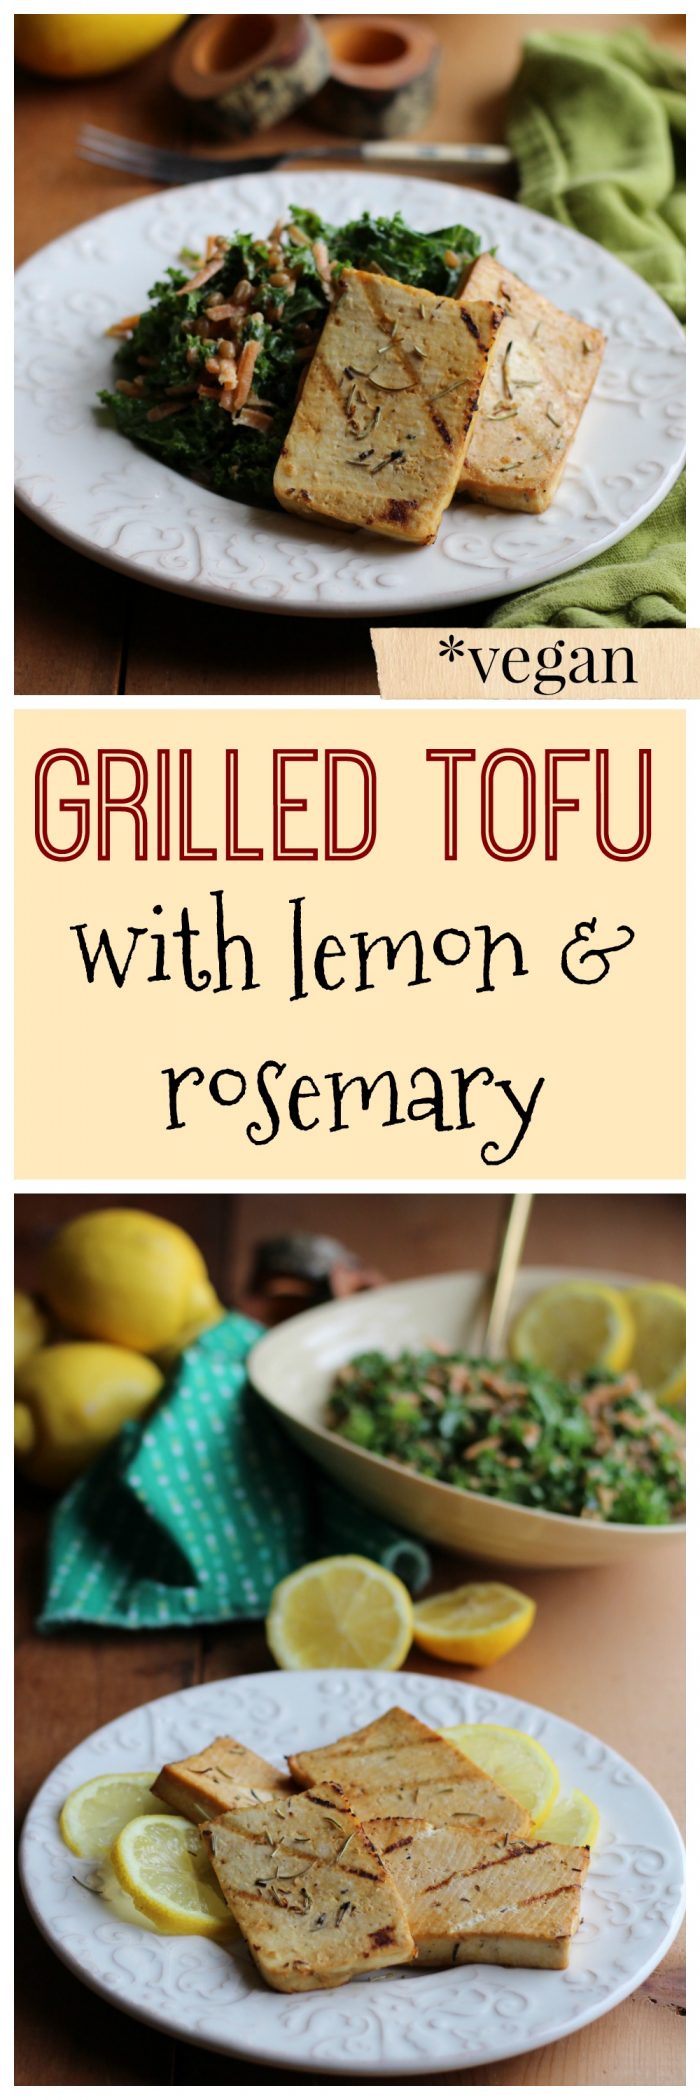 Grilled tofu with lemon & rosemary: This is the perfect vegan entree for your next barbecue. Serve with grilled vegetables or a salad. | cadryskitchen.com